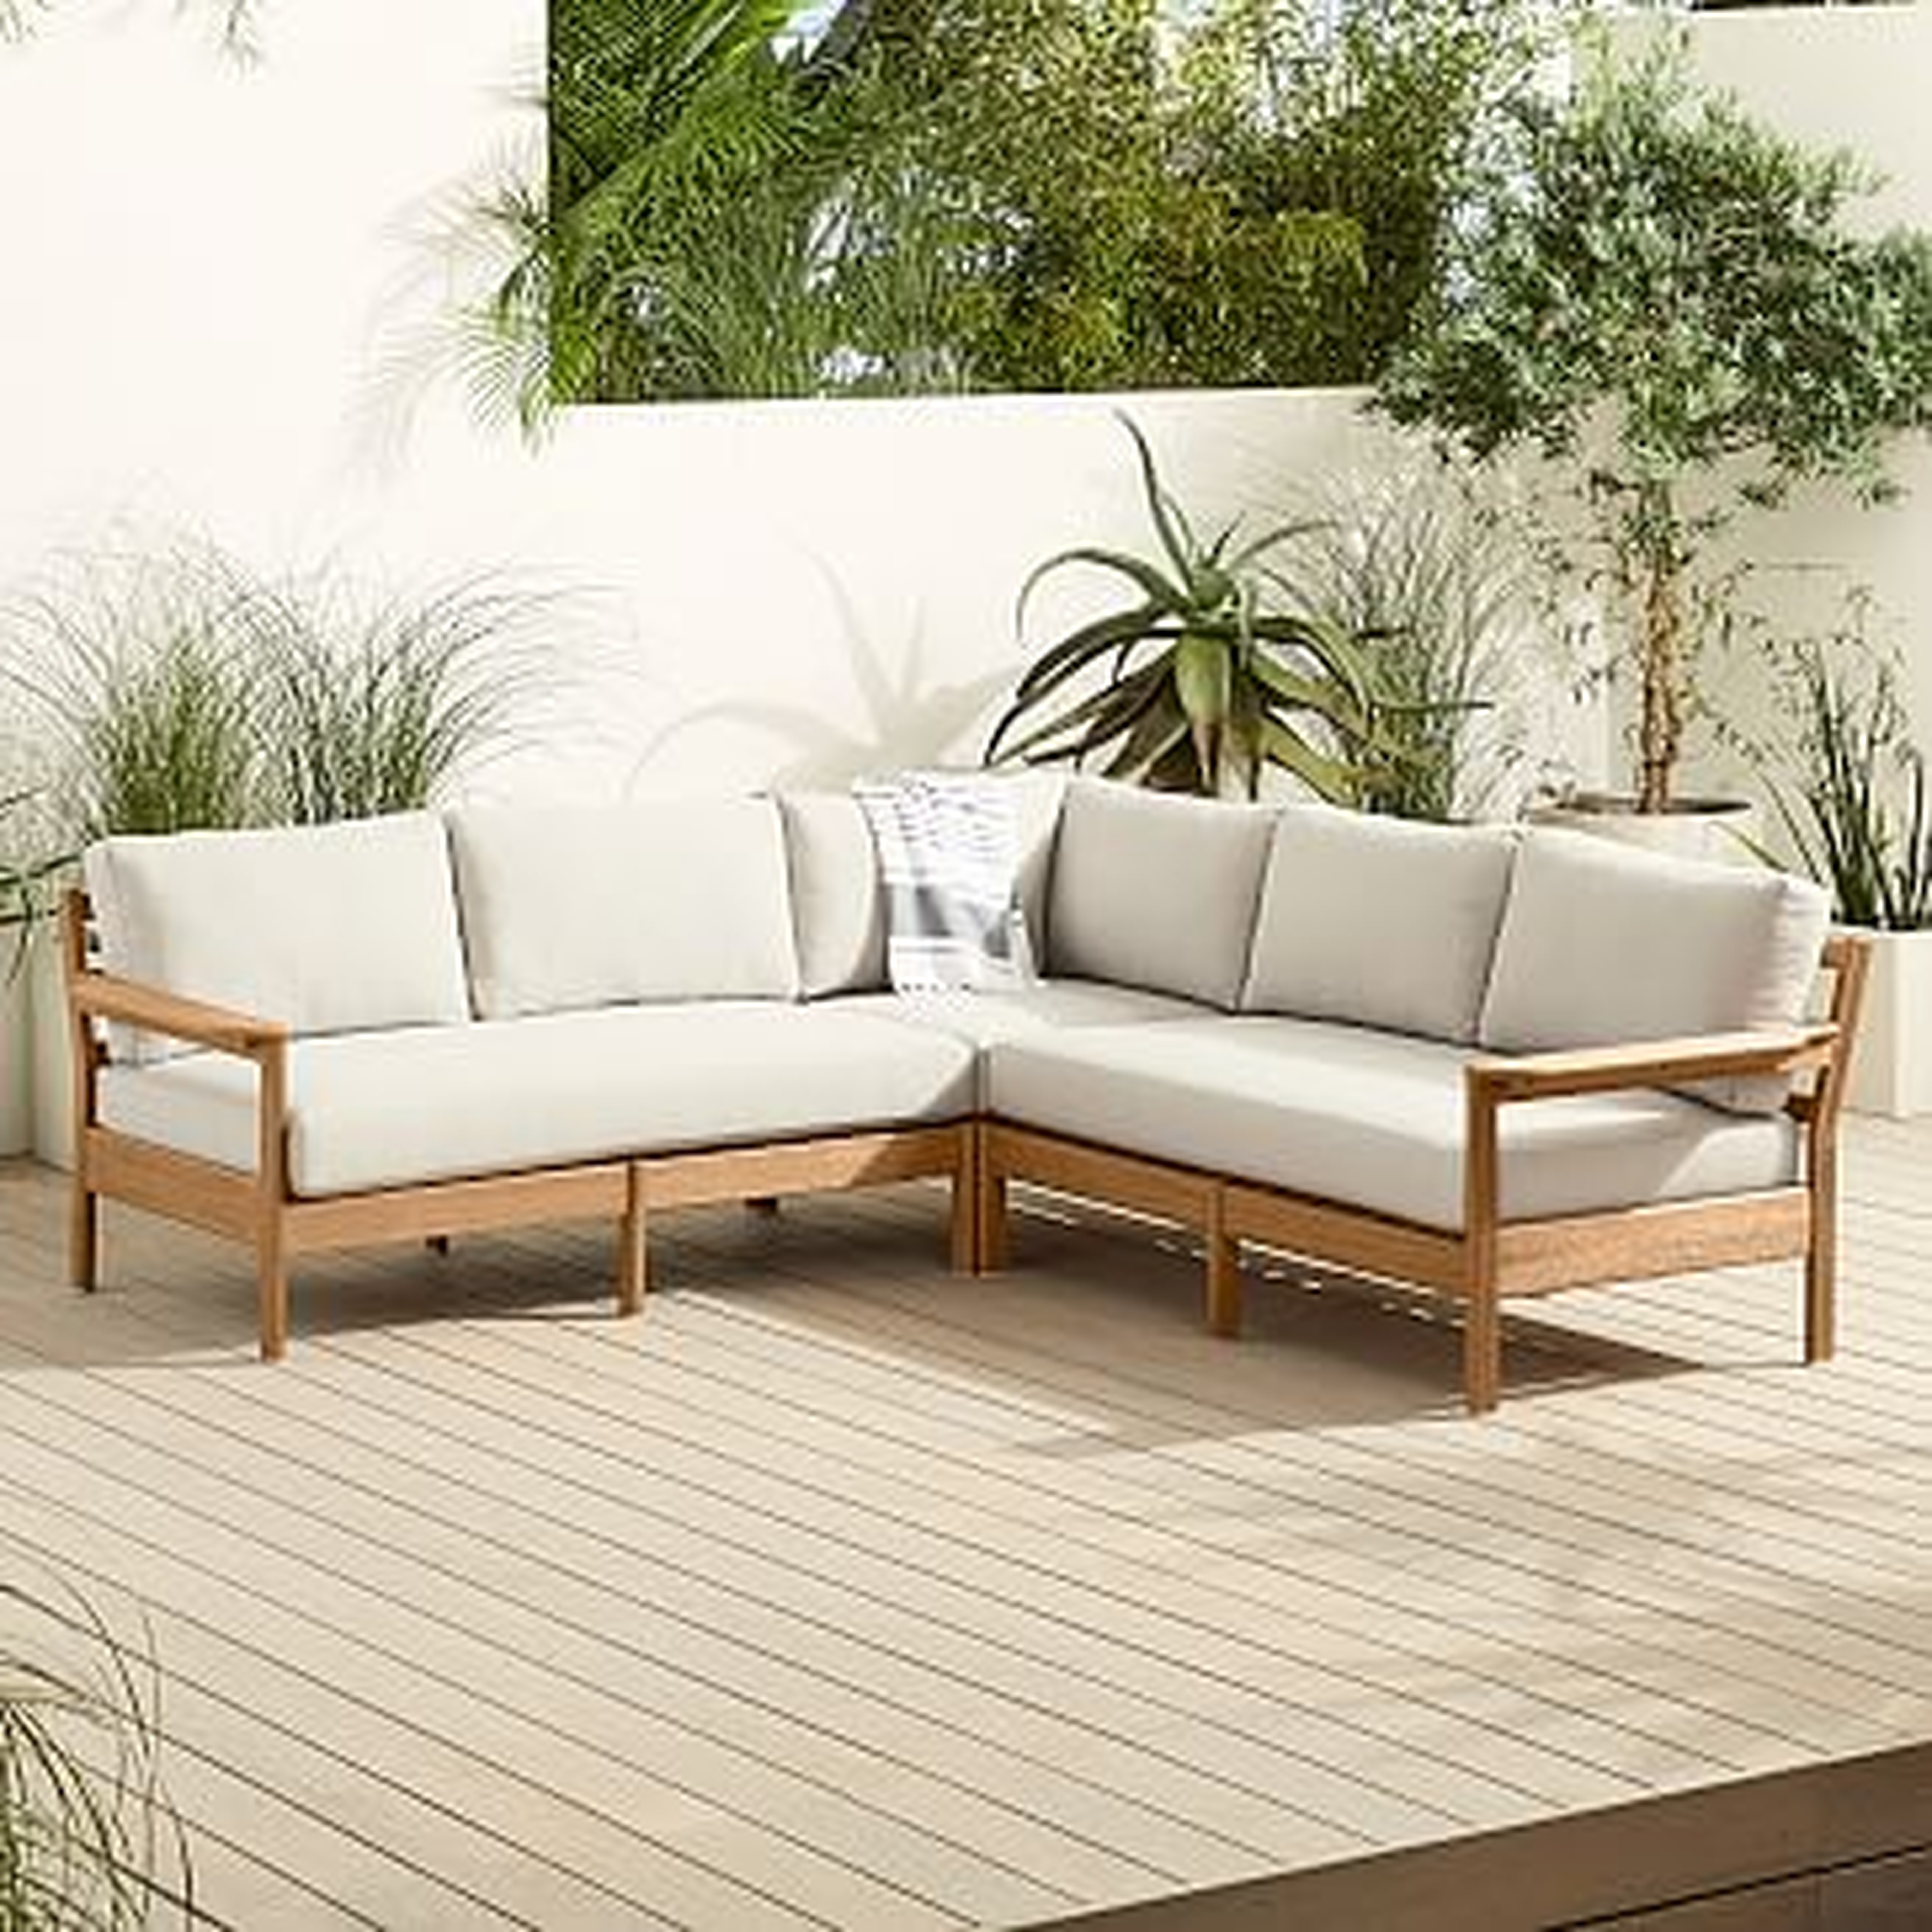 Playa Outdoor L-Shaped Sectional, Mast, Cement - West Elm